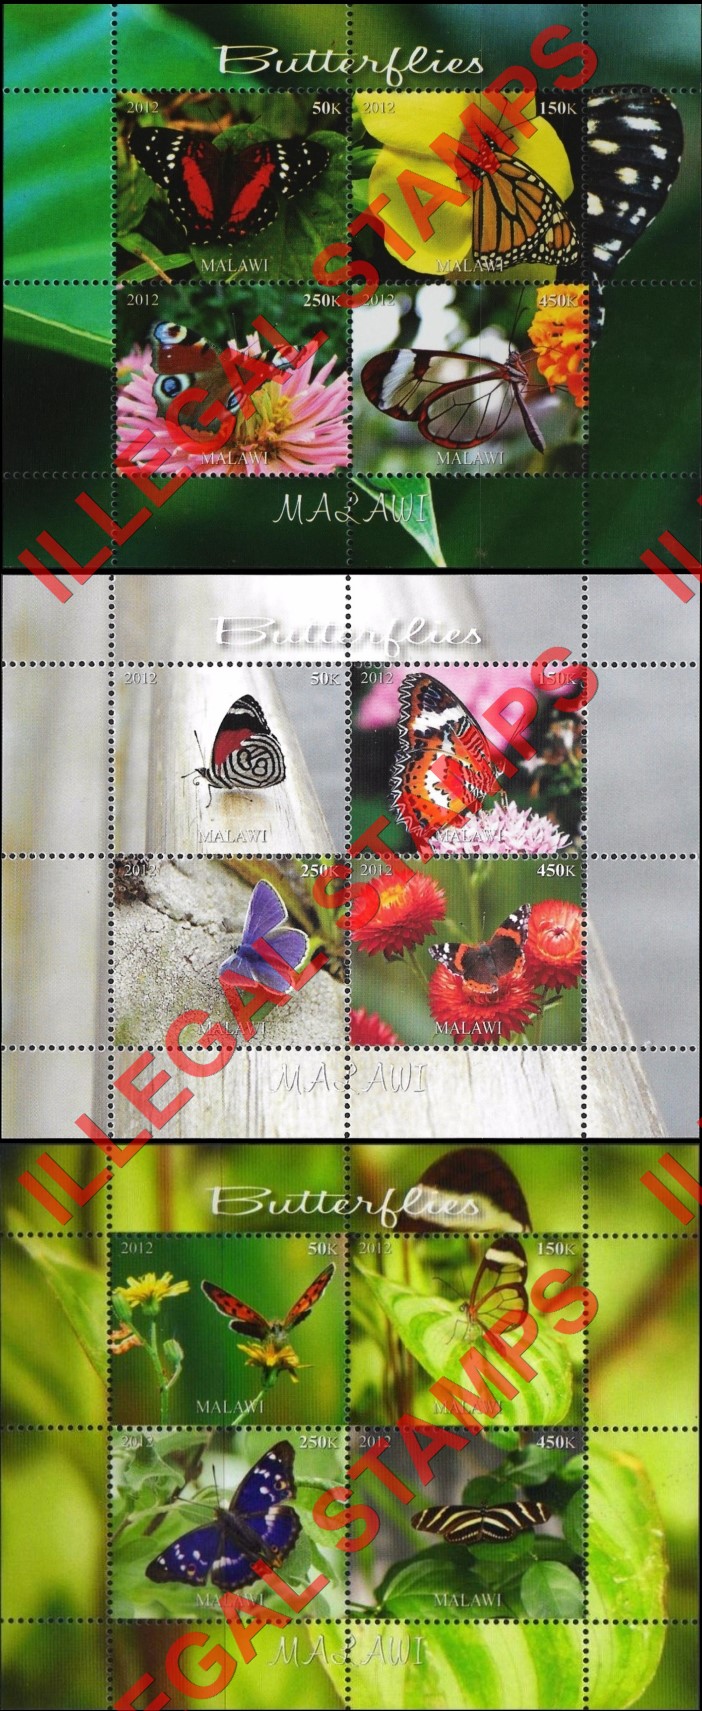 Malawi 2012 Butterflies Illegal Stamp Souvenir Sheets of 4